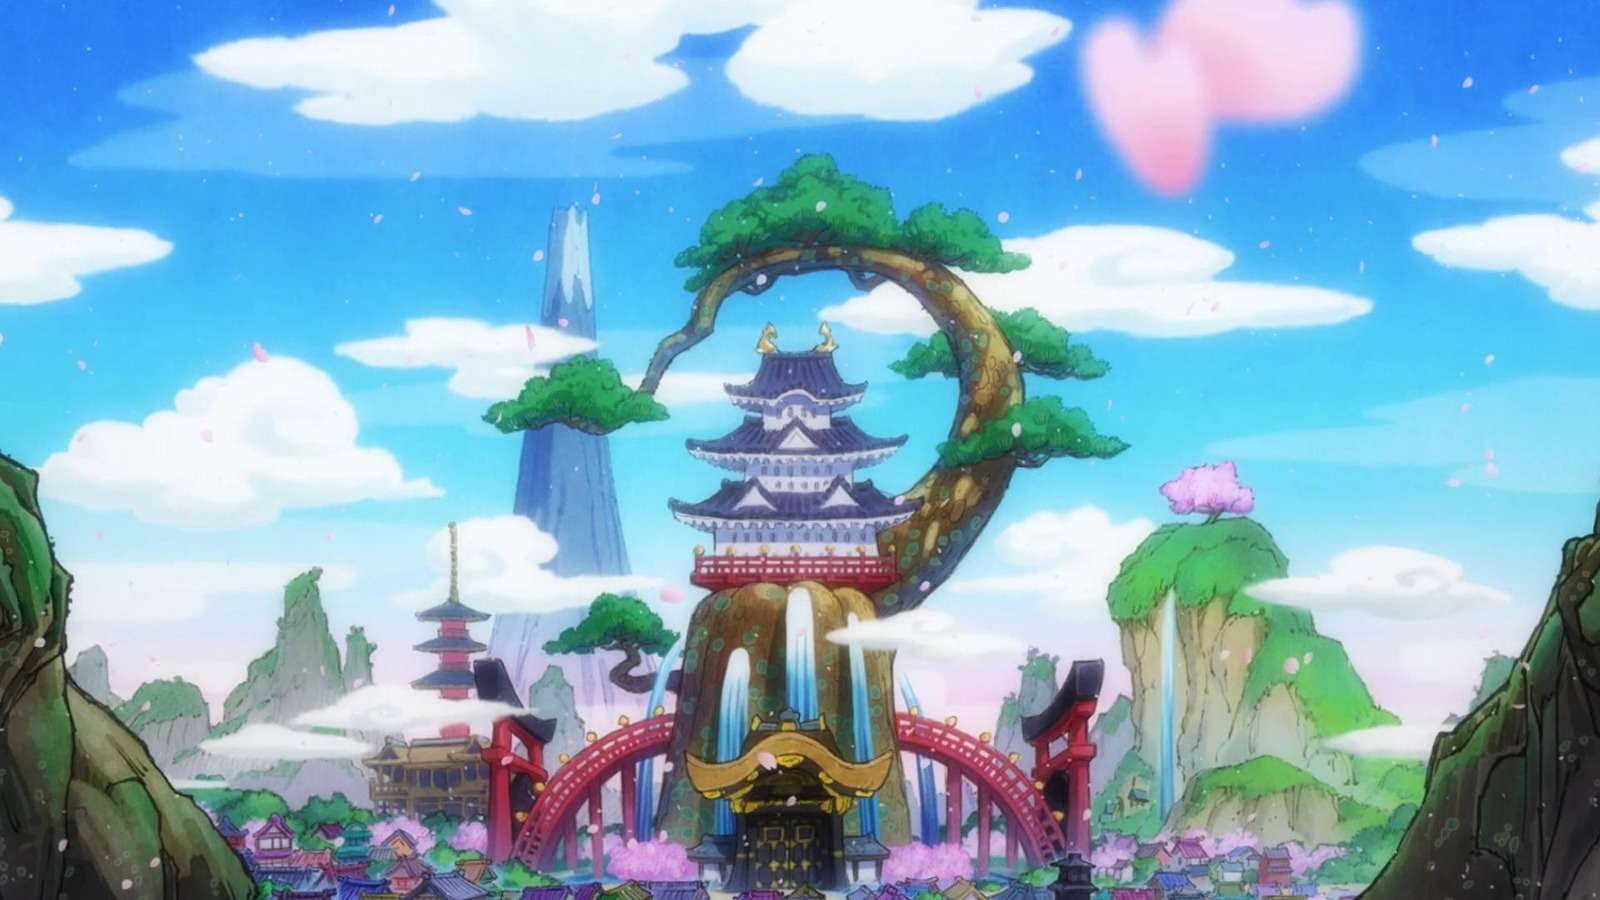 An image of the Wano Country in One Piece